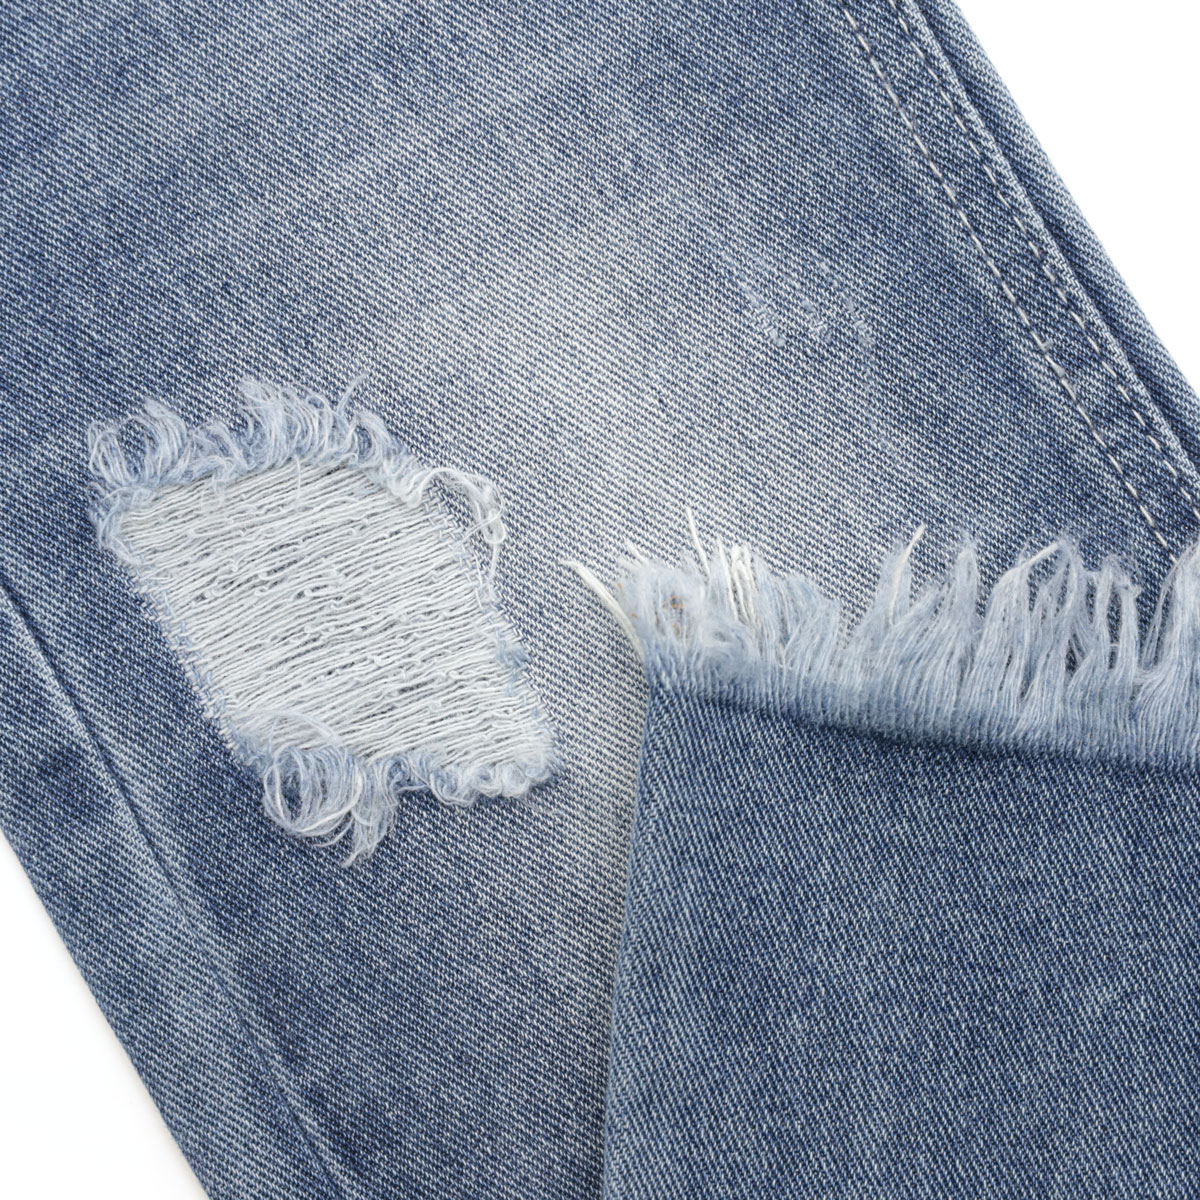 Whats the Best Denim Fabric Material Brand in China? 2